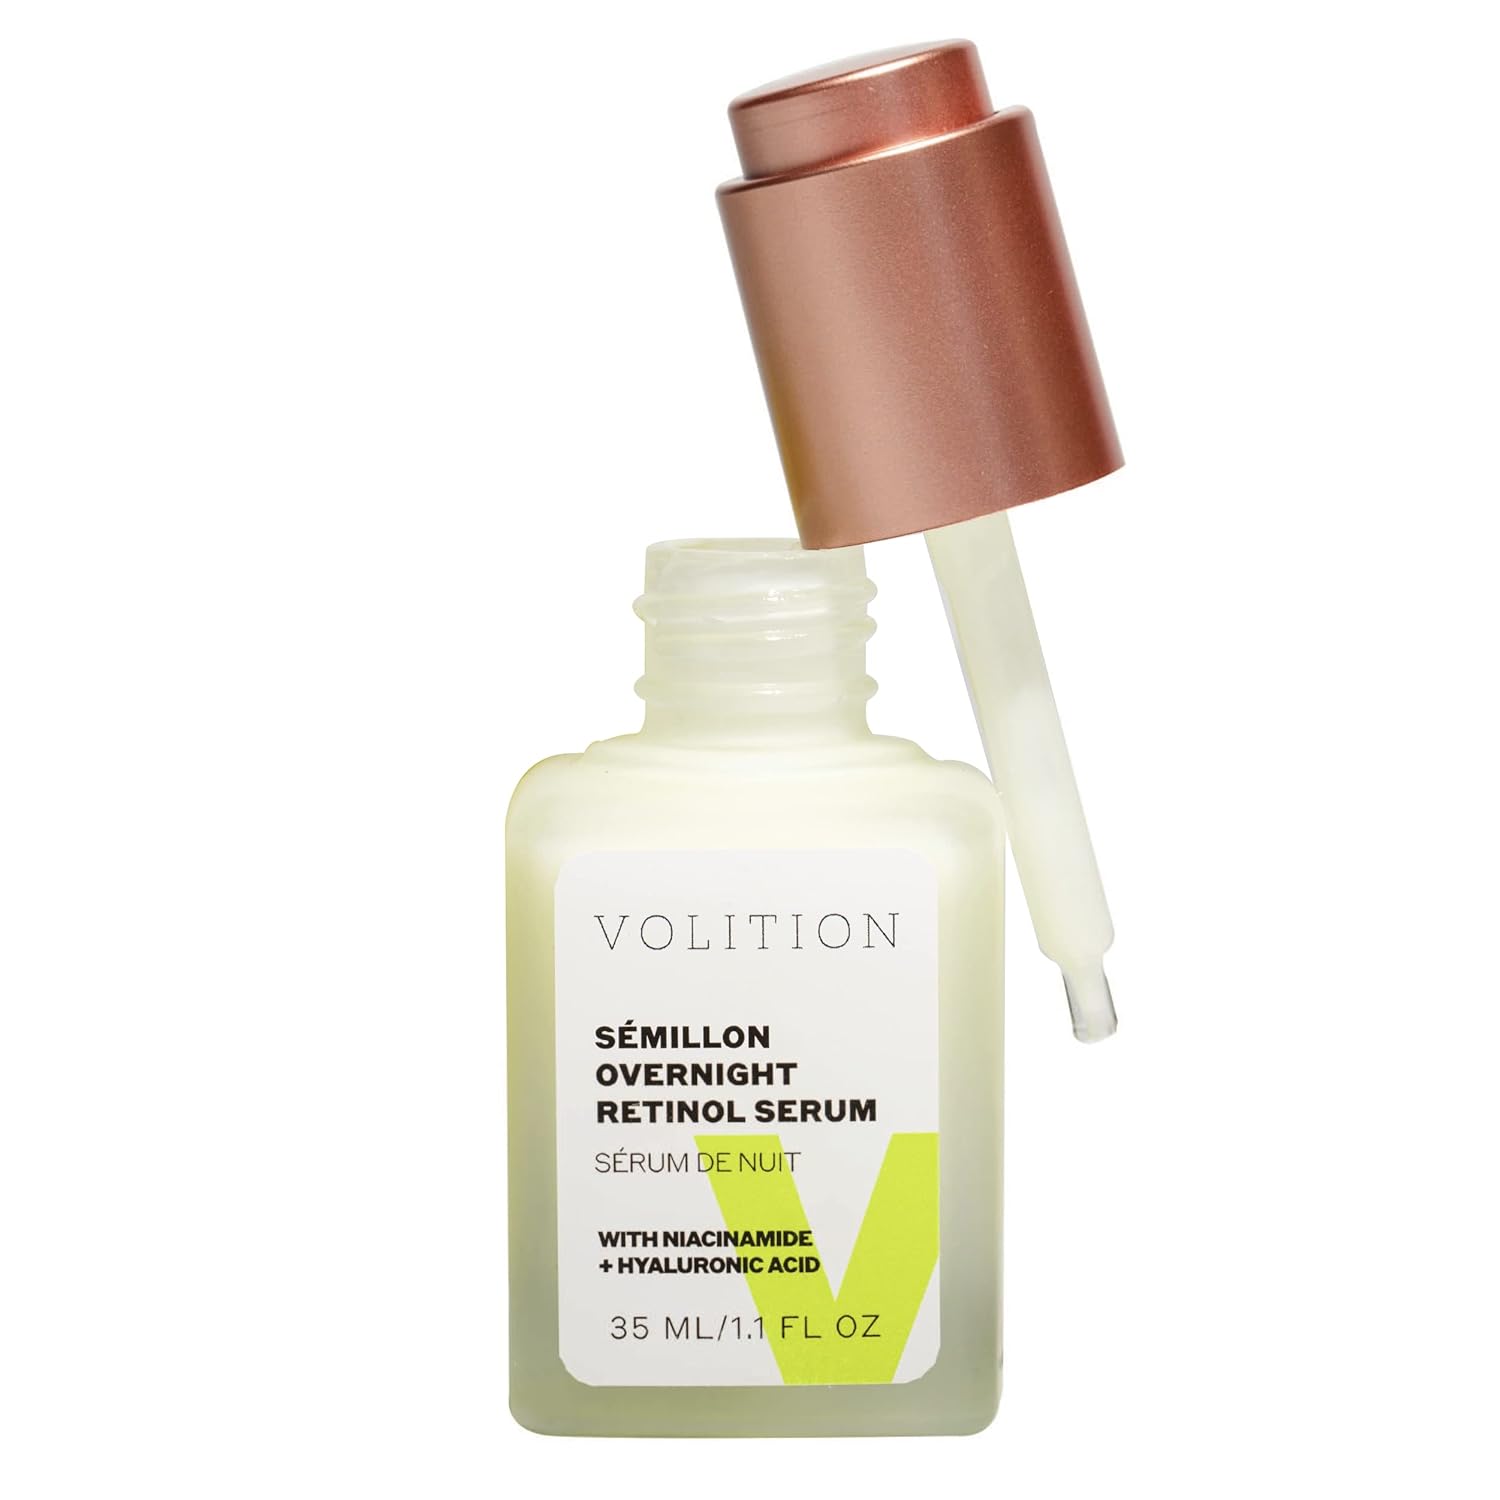 Volition Semillon Overnight Retinol Serum - Anti Aging Serum with Niacinamide & Hyaluronic Acid to Minimize Fine Lines and Wrinkles - Age Defying Vegan Retinol for All Skin Types (1.1  )